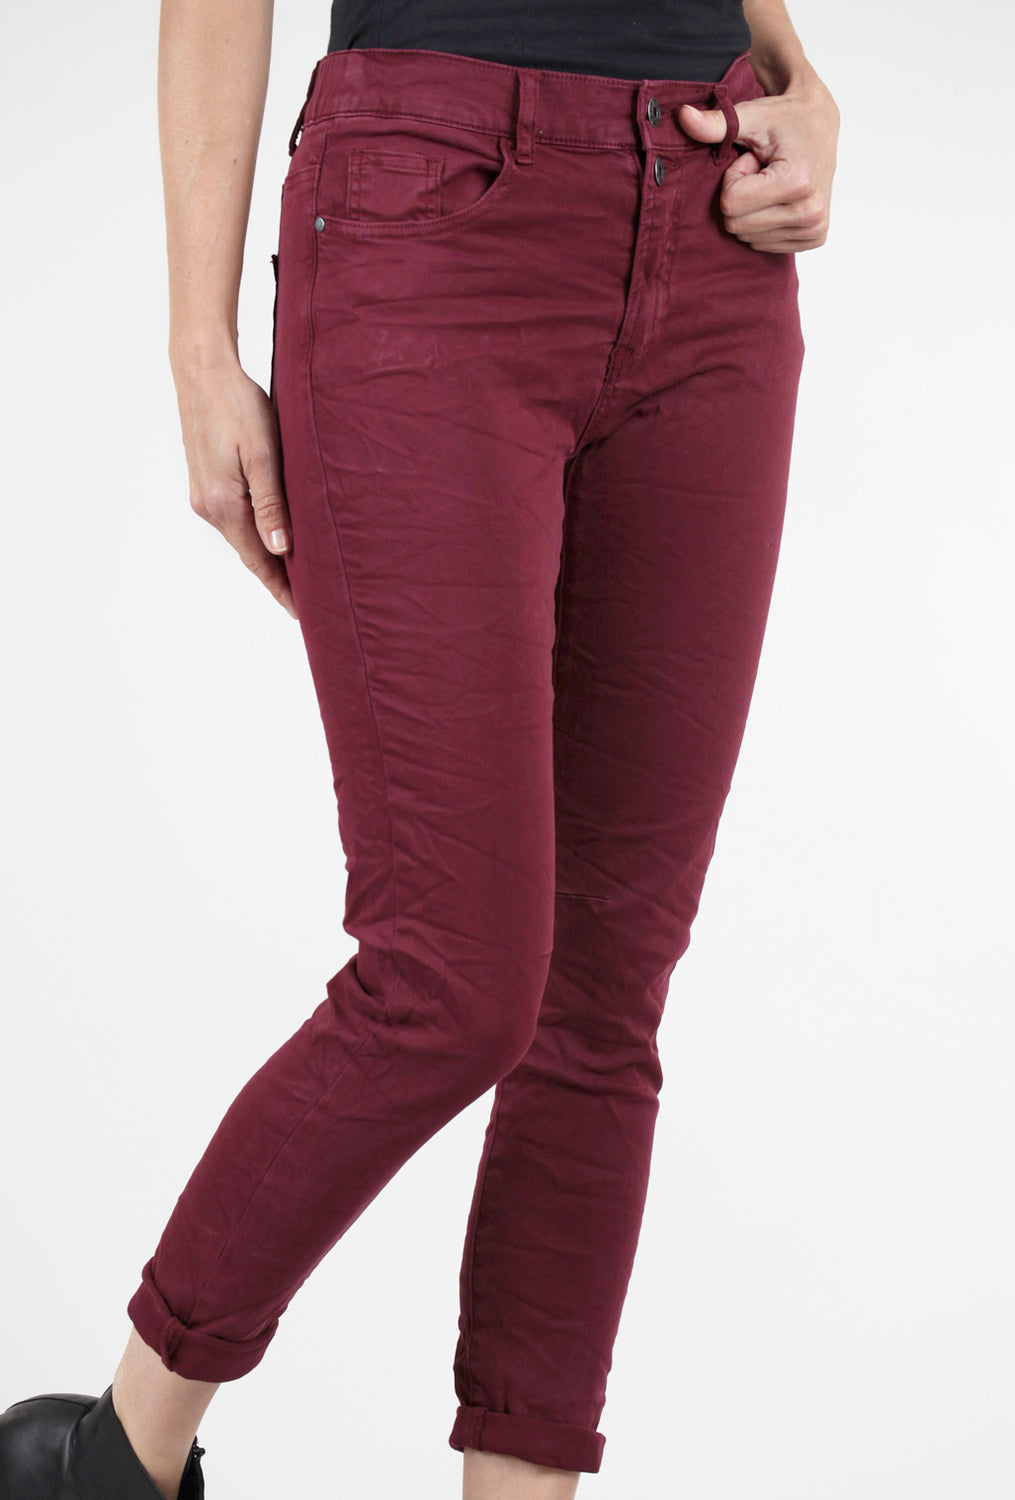 Femme Fatale Two-Button Stretchy Pant, Wine 